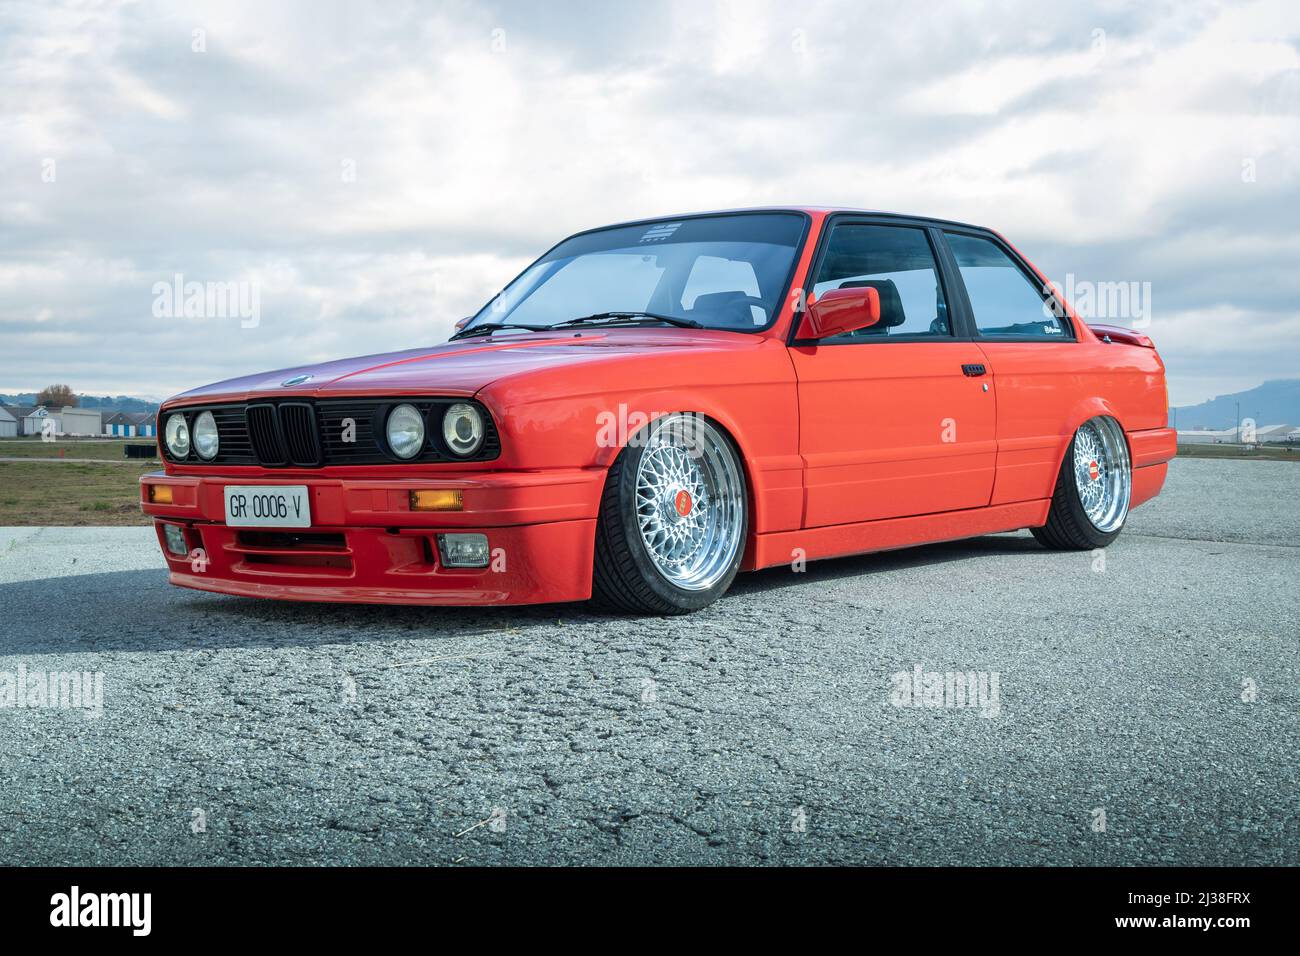 SABADELL, SPAIN-OCTOBER 9, 2021: BMW 3 Series (E30) two-door sedan (second generation of BMW 3 Series), red colored Stock Photo